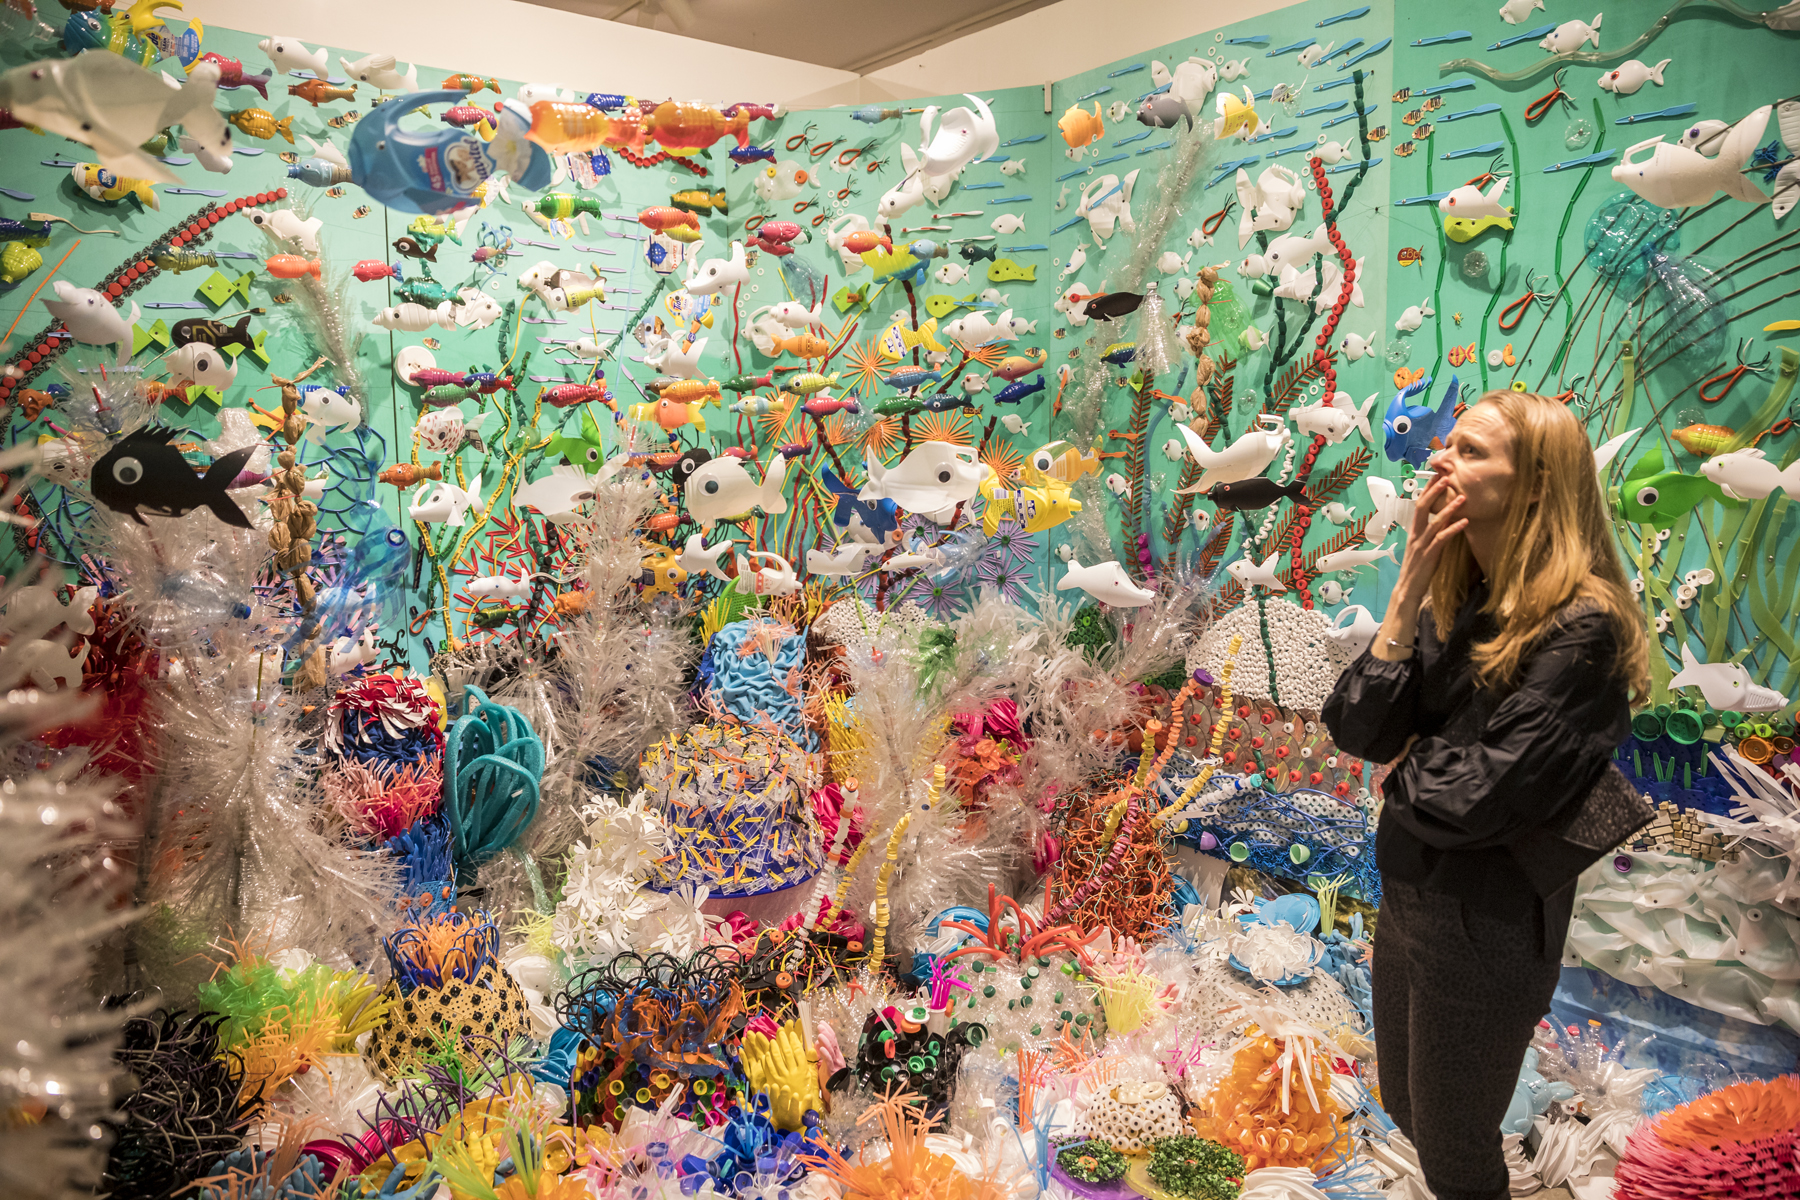 A woman standing in the coral reef installation/